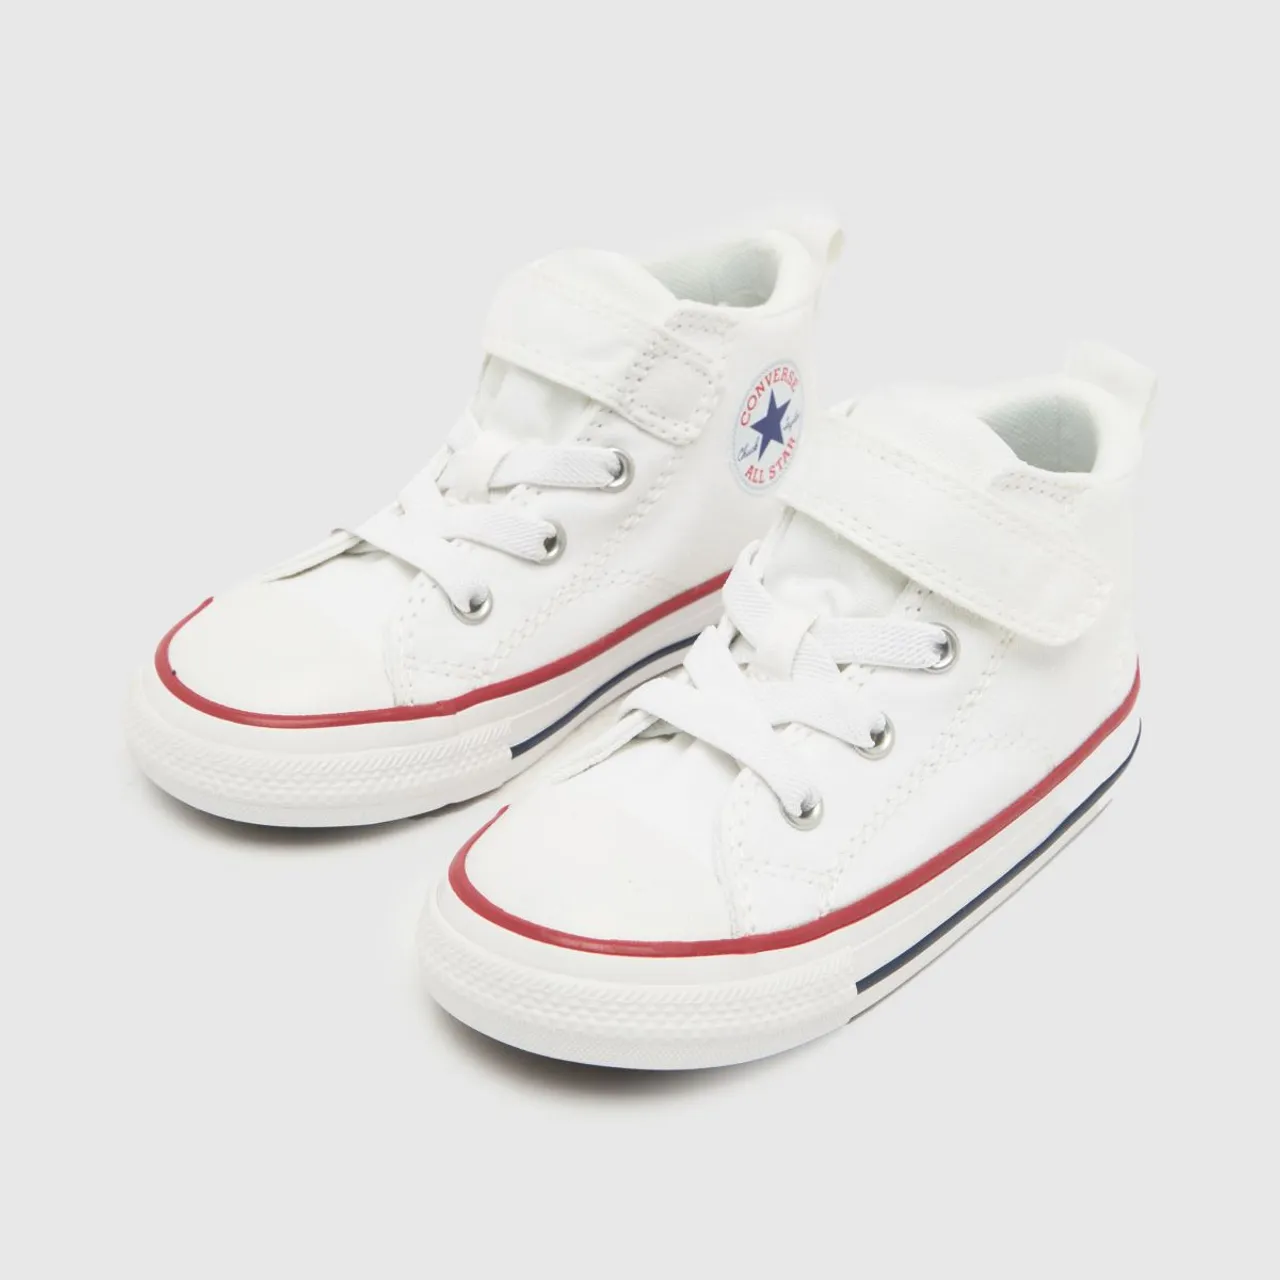 Converse White All Star Malden Street V Boys Toddler Trainers